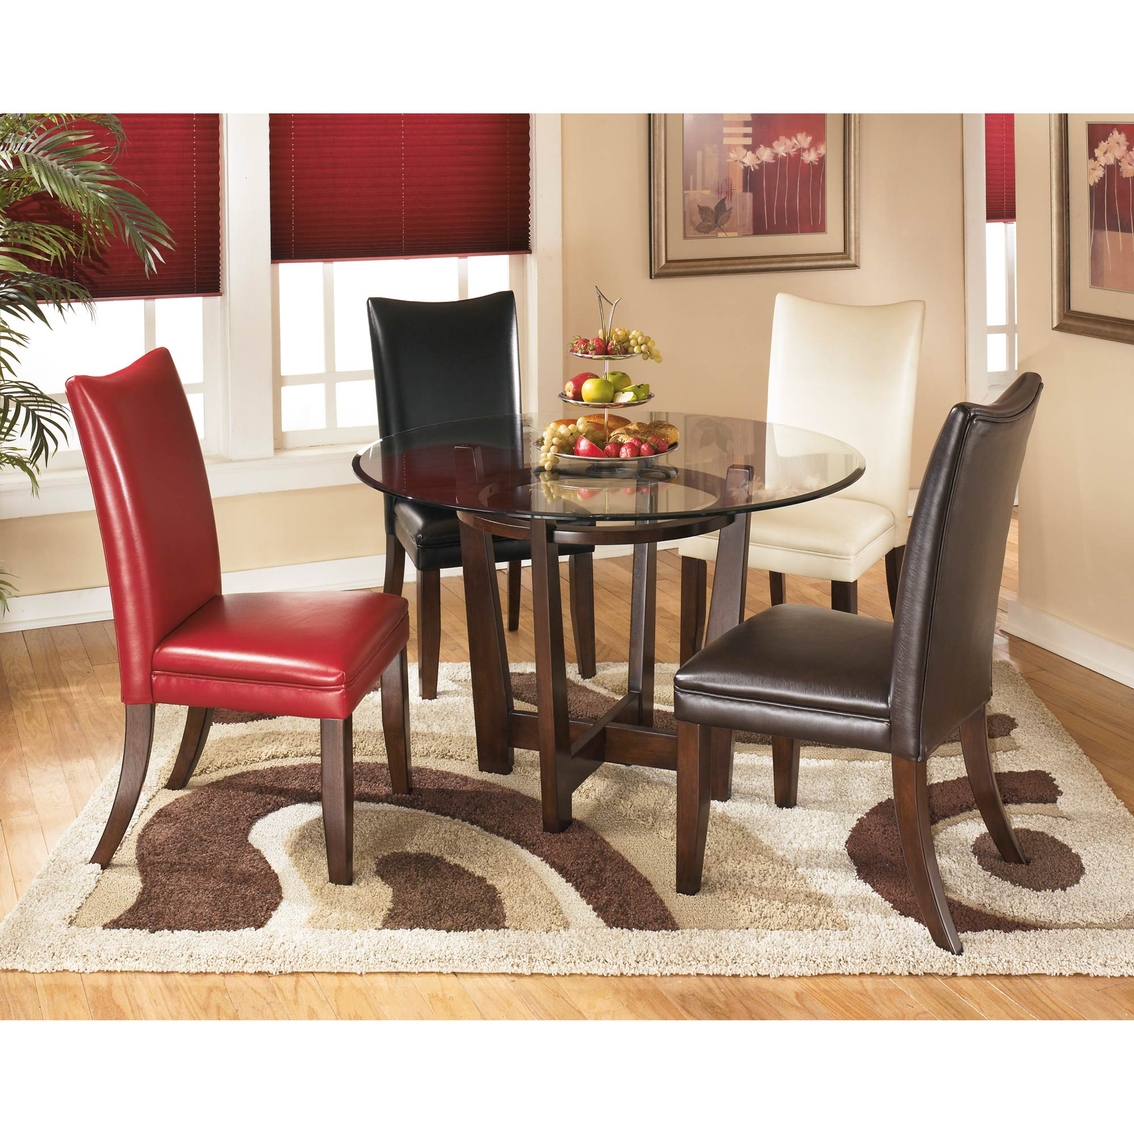 Ashley Charrell Dining Room Side Chair 2 pk. - Image 2 of 2